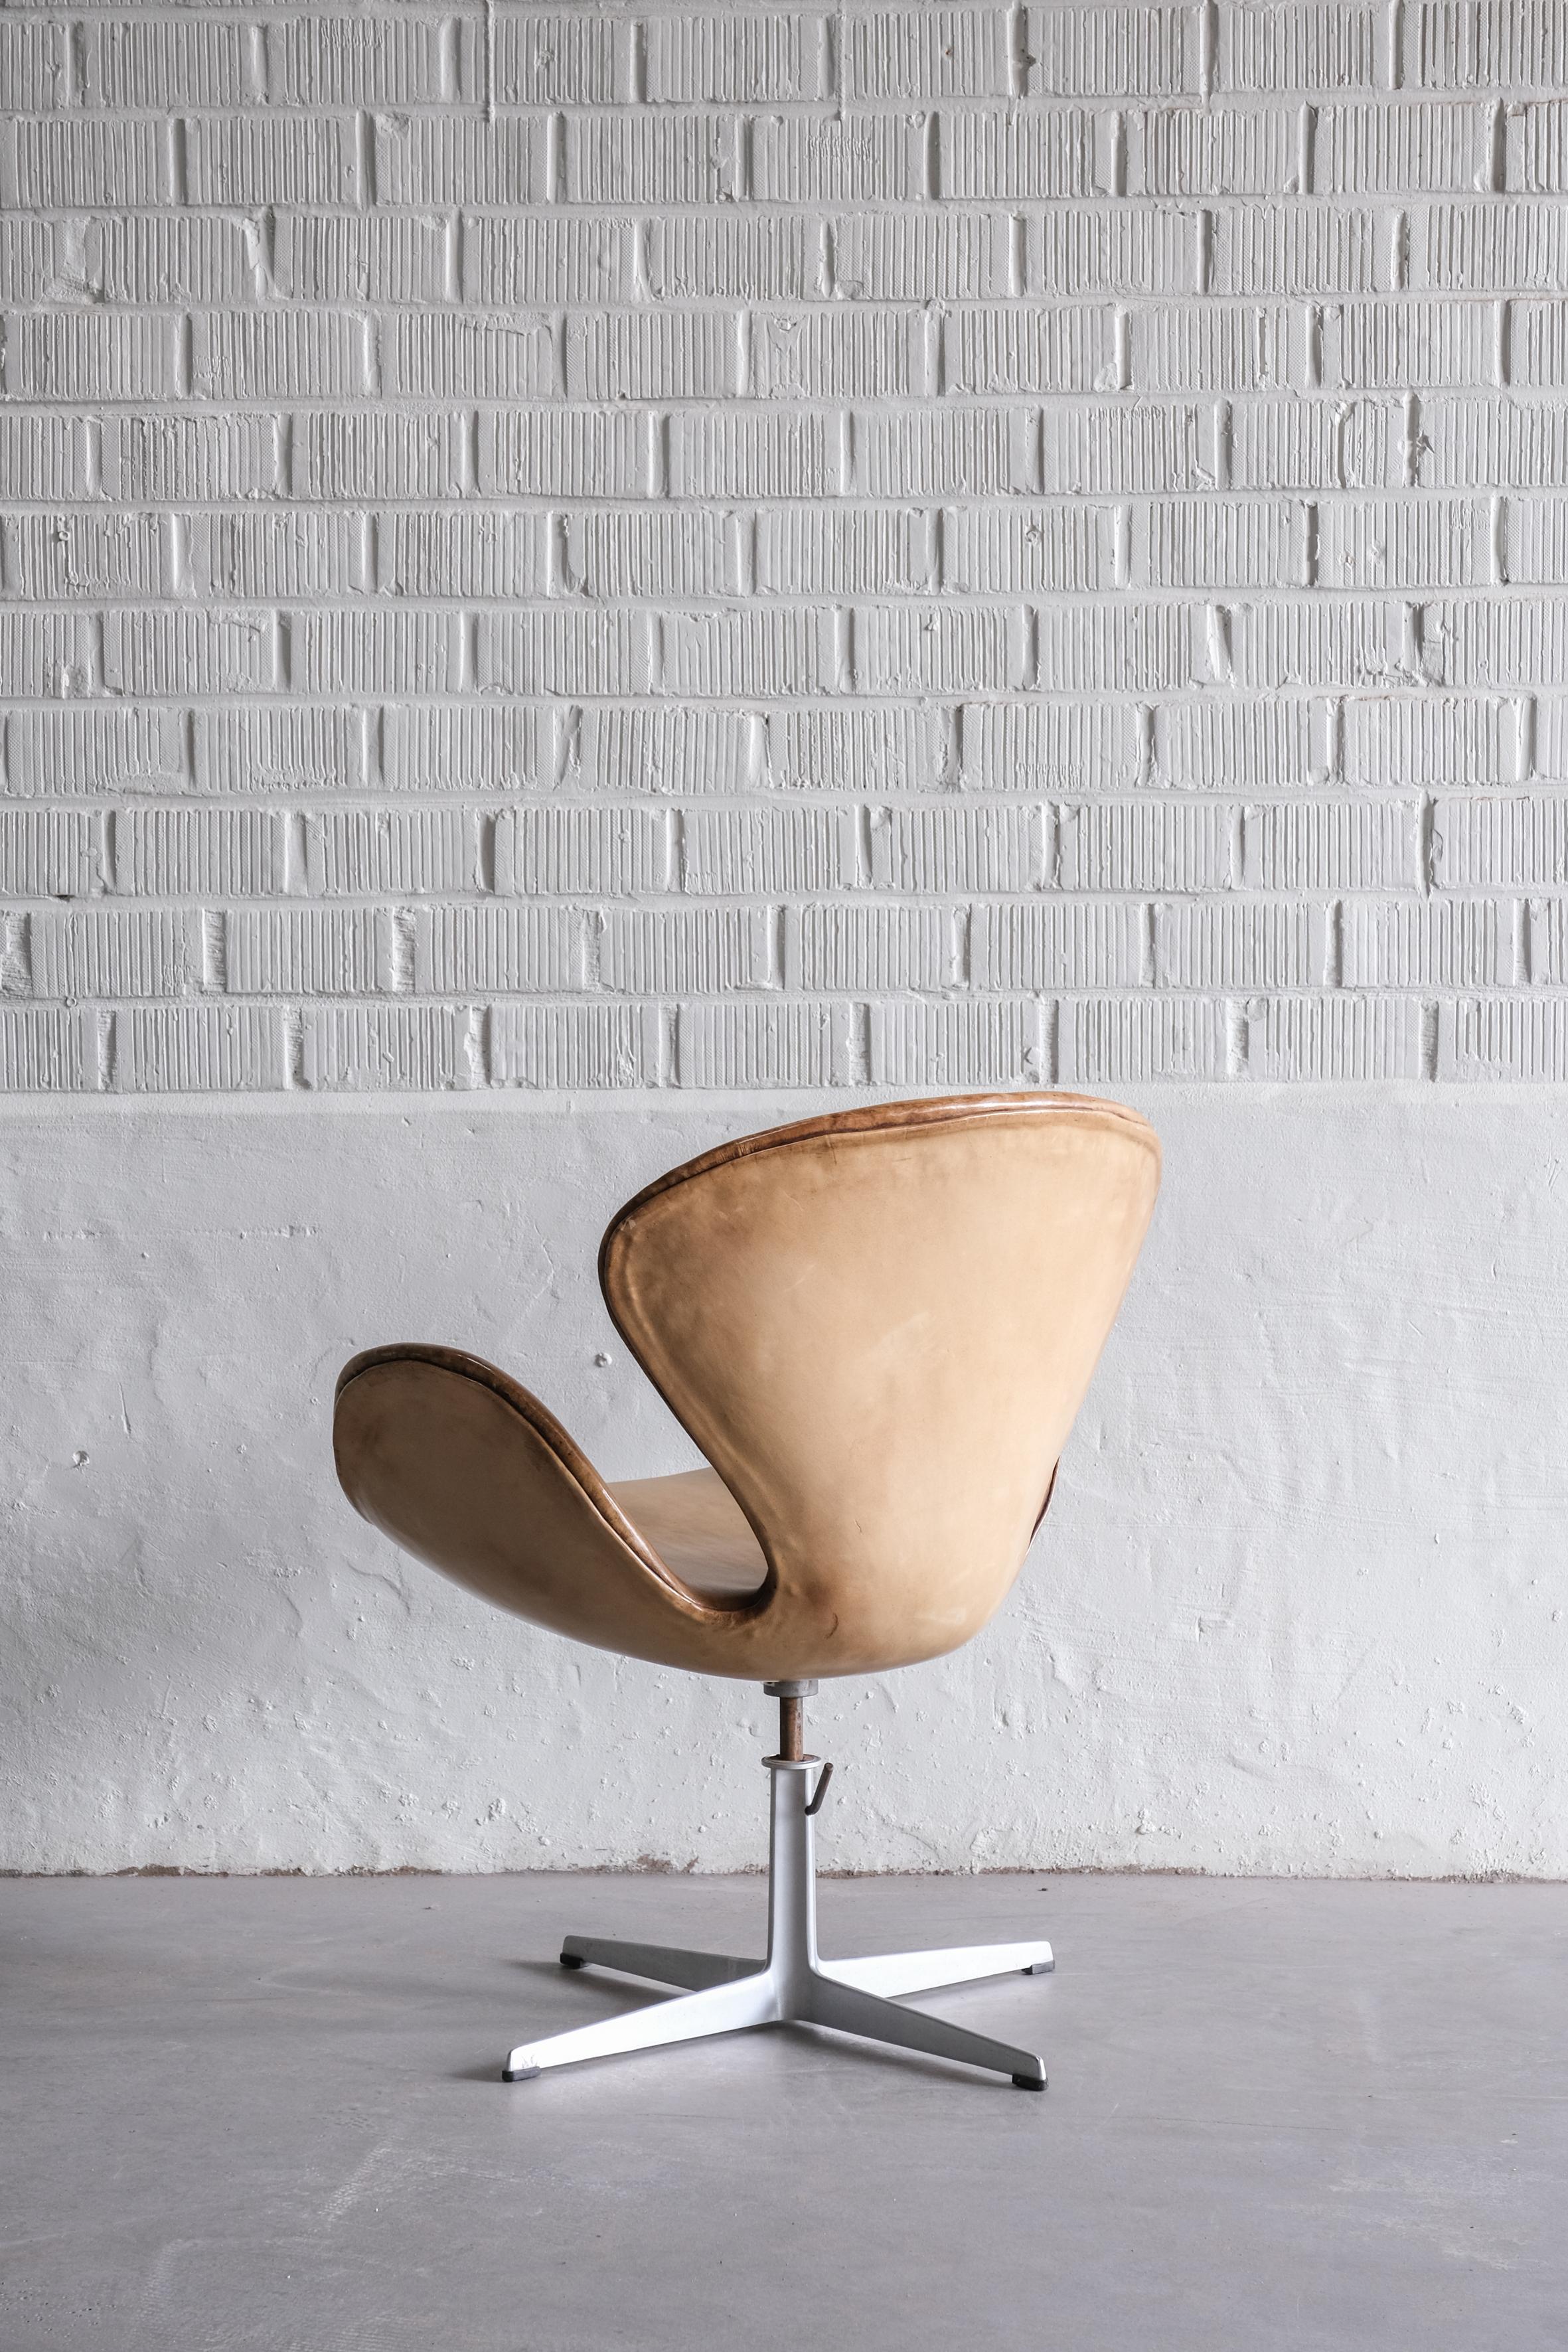 Mid-Century Modern Swan Chair by Arne Jacobsen 1971 with original leather and steel adjustable base